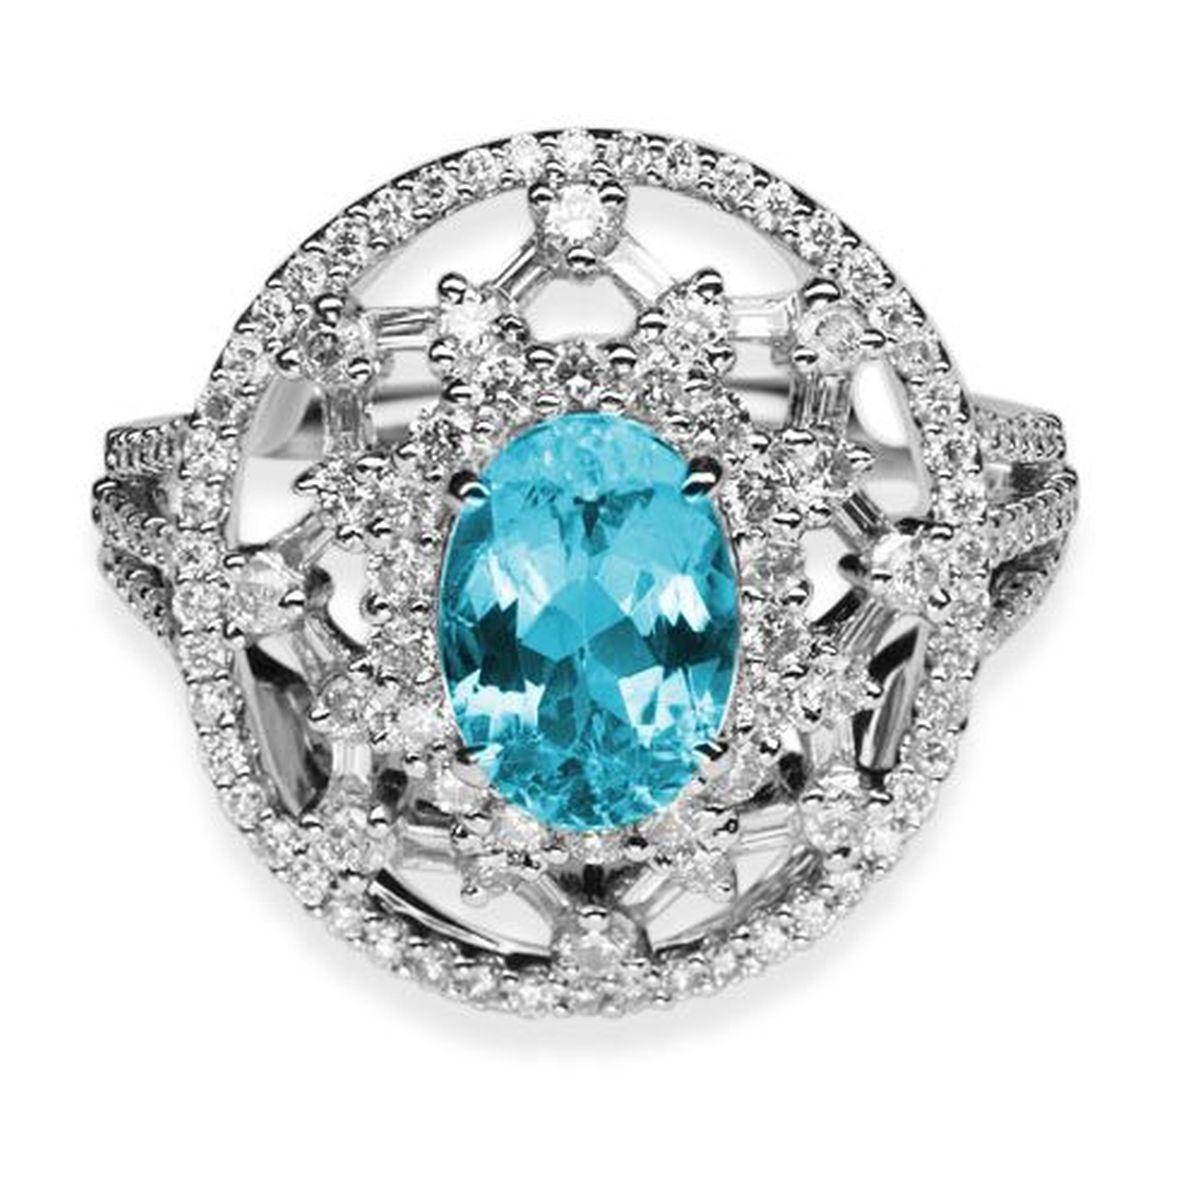 17.16 Carat Paraiba Tourmaline GIA and Diamond Platinum Ring Estate Fine Jewelry In New Condition For Sale In Montreal, QC